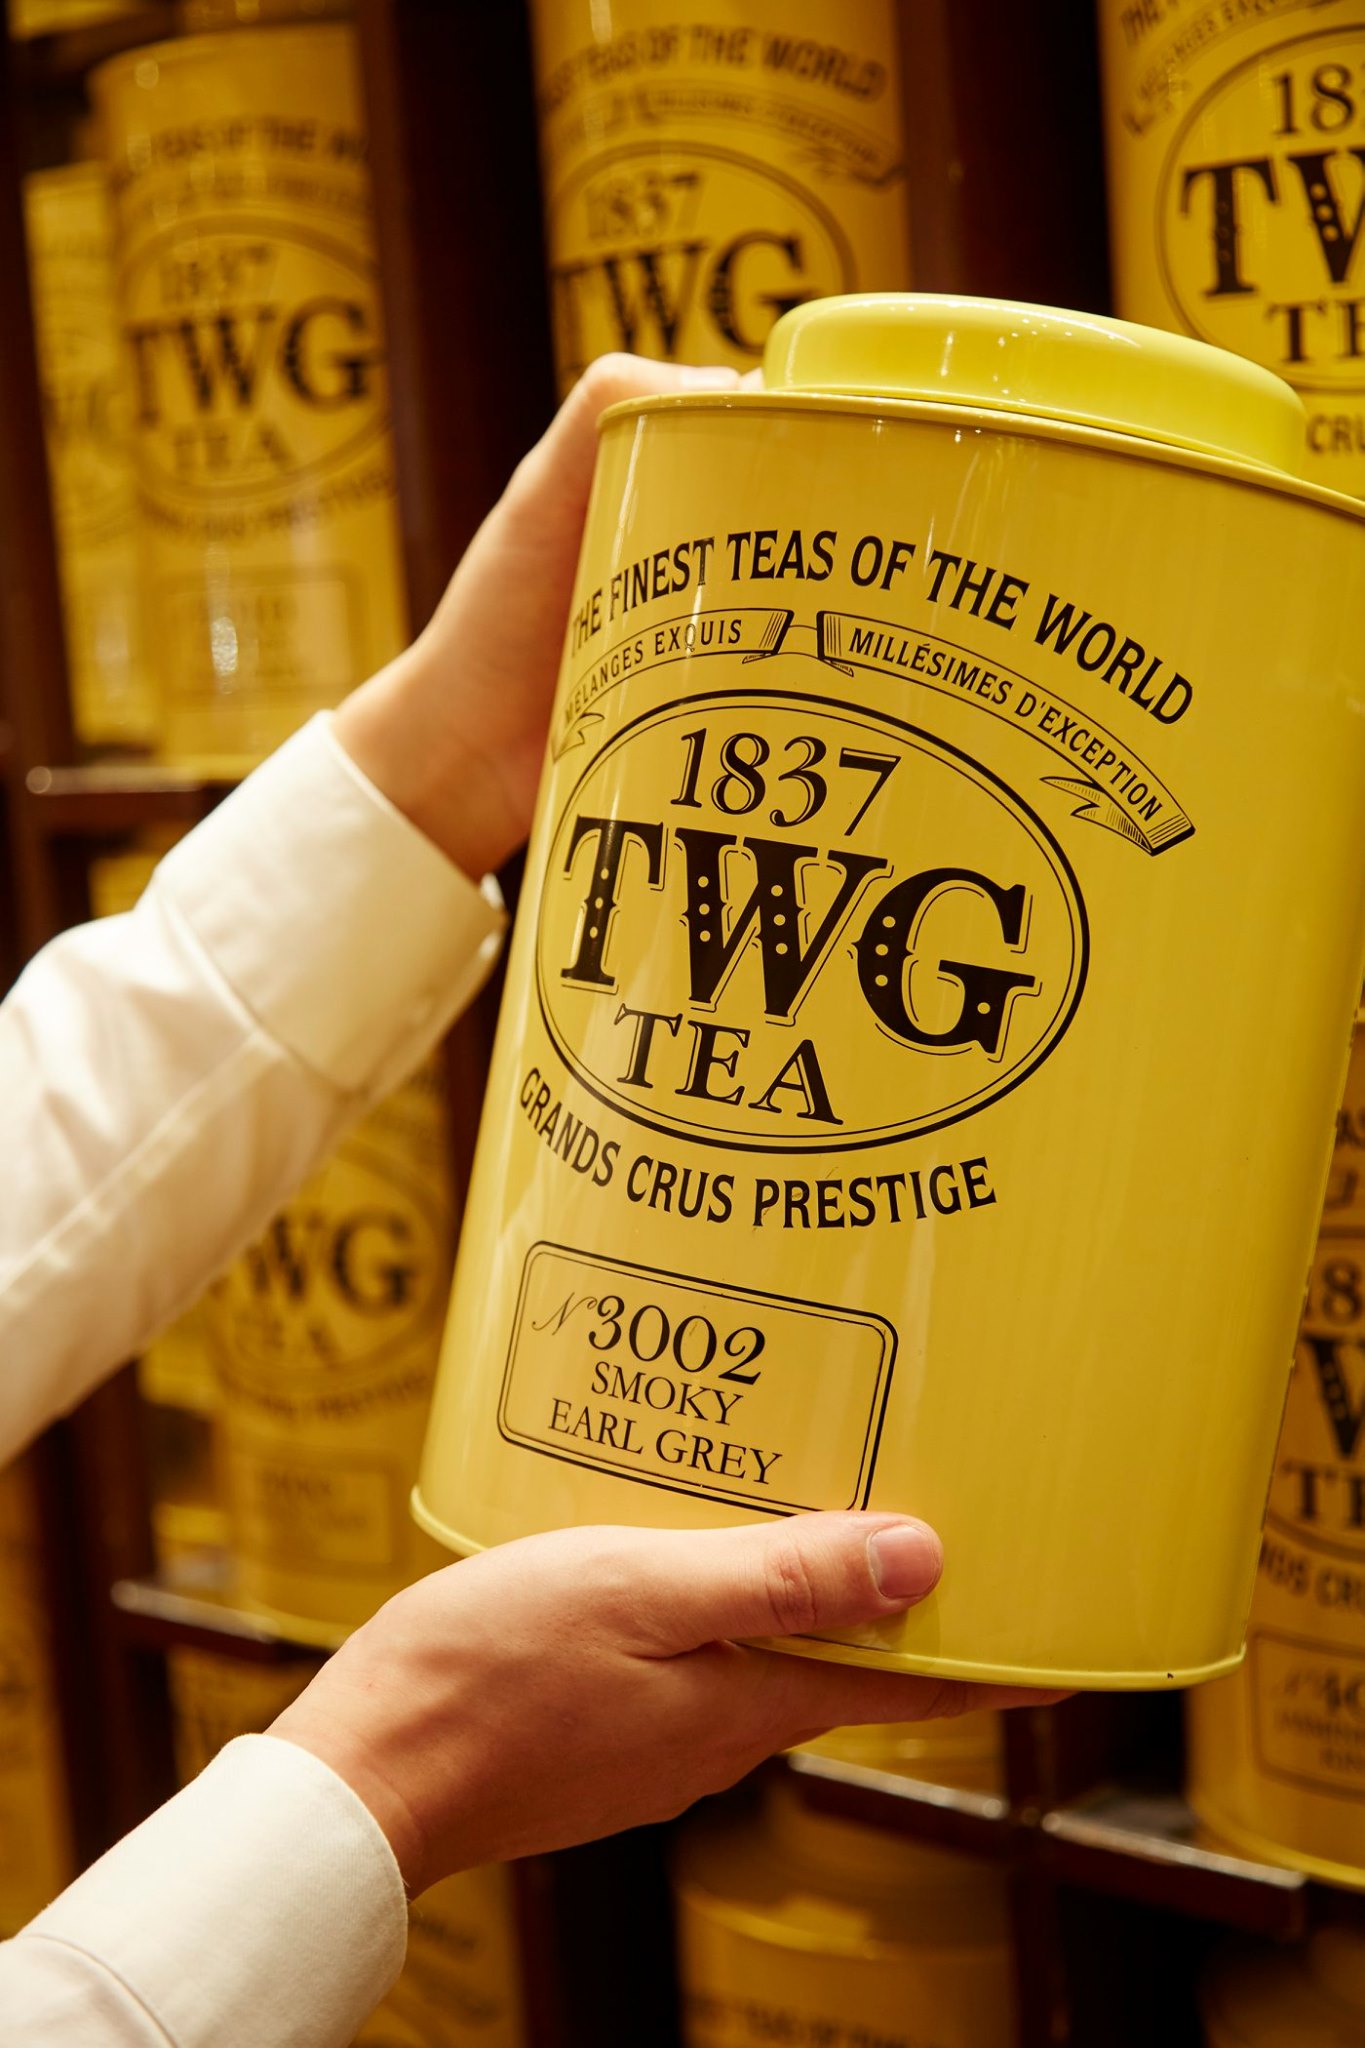 #NowInfusing: A royal and sophisticated TWG Tea blend, the ethereal, smoky aroma of incense is complemented by sweet and fragrant citrus fruits in this surprising black tea. A daring combination of Russian and English tastes.